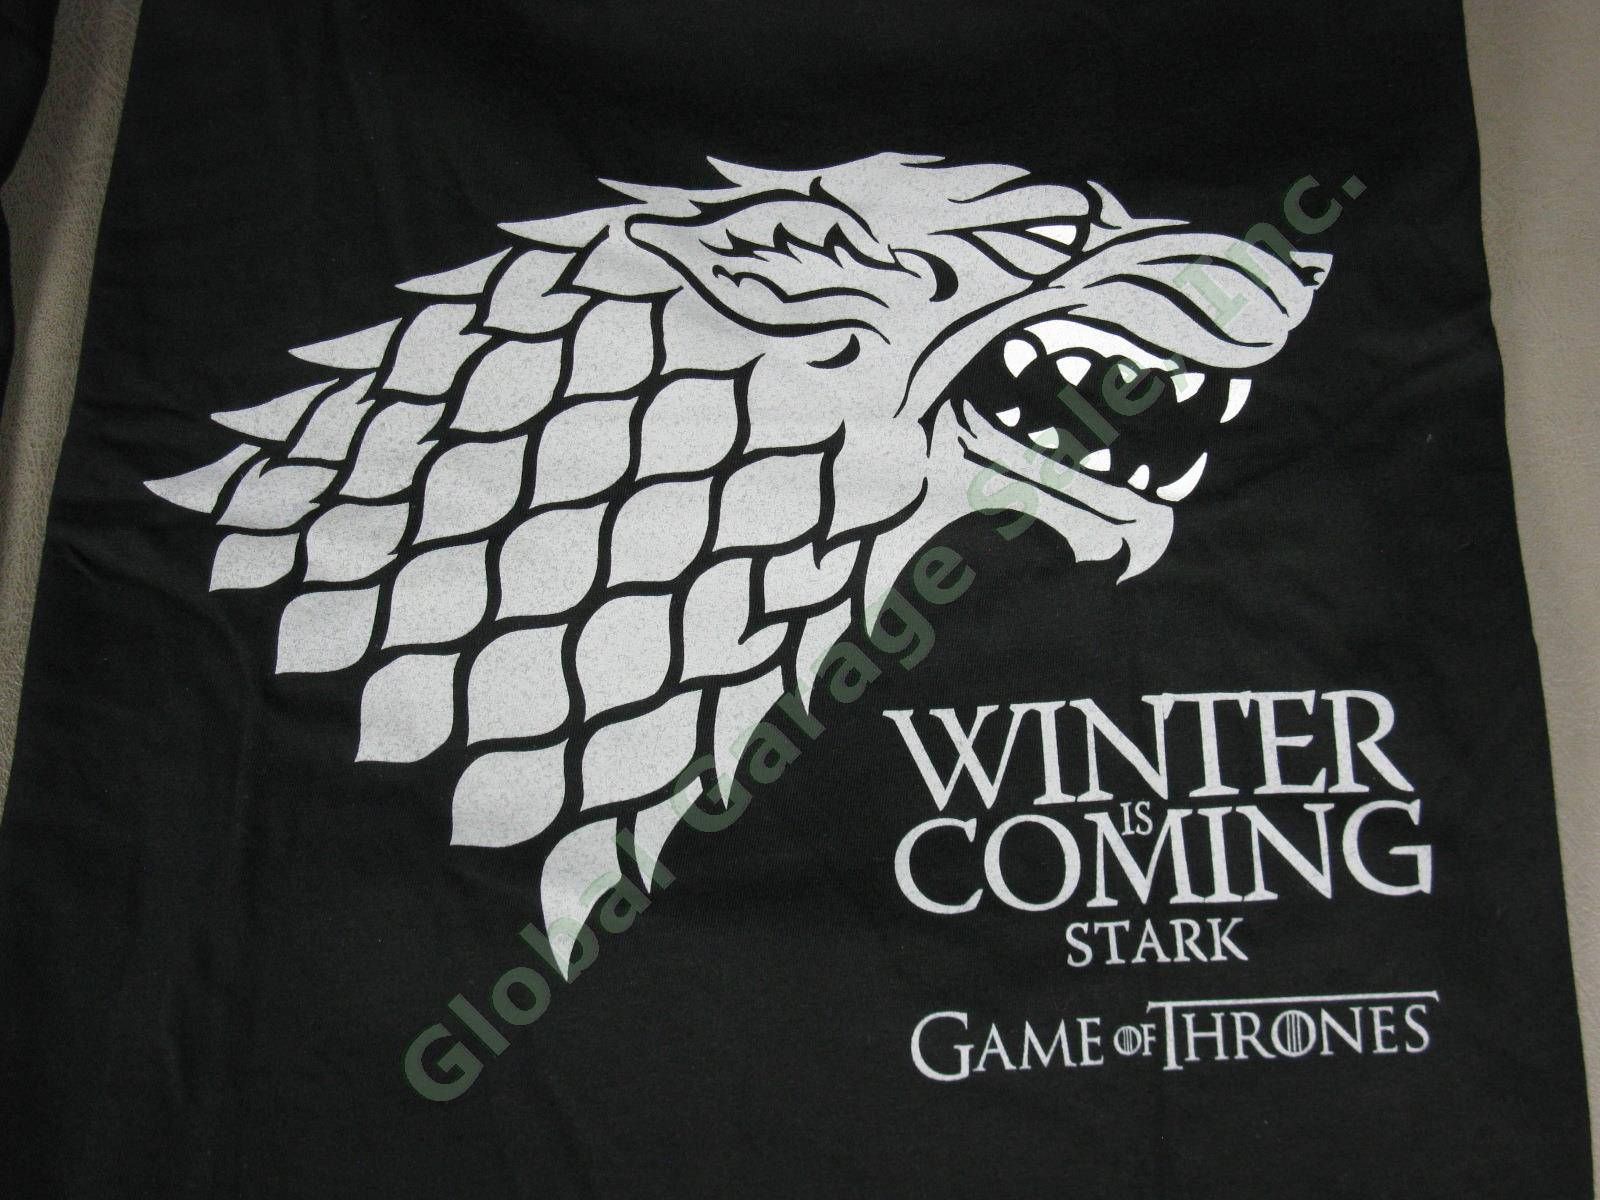 20 RARE Game Of Thrones Winter Is Coming Shirt Lot 2010 San Diego Comic-Con SDCC 1